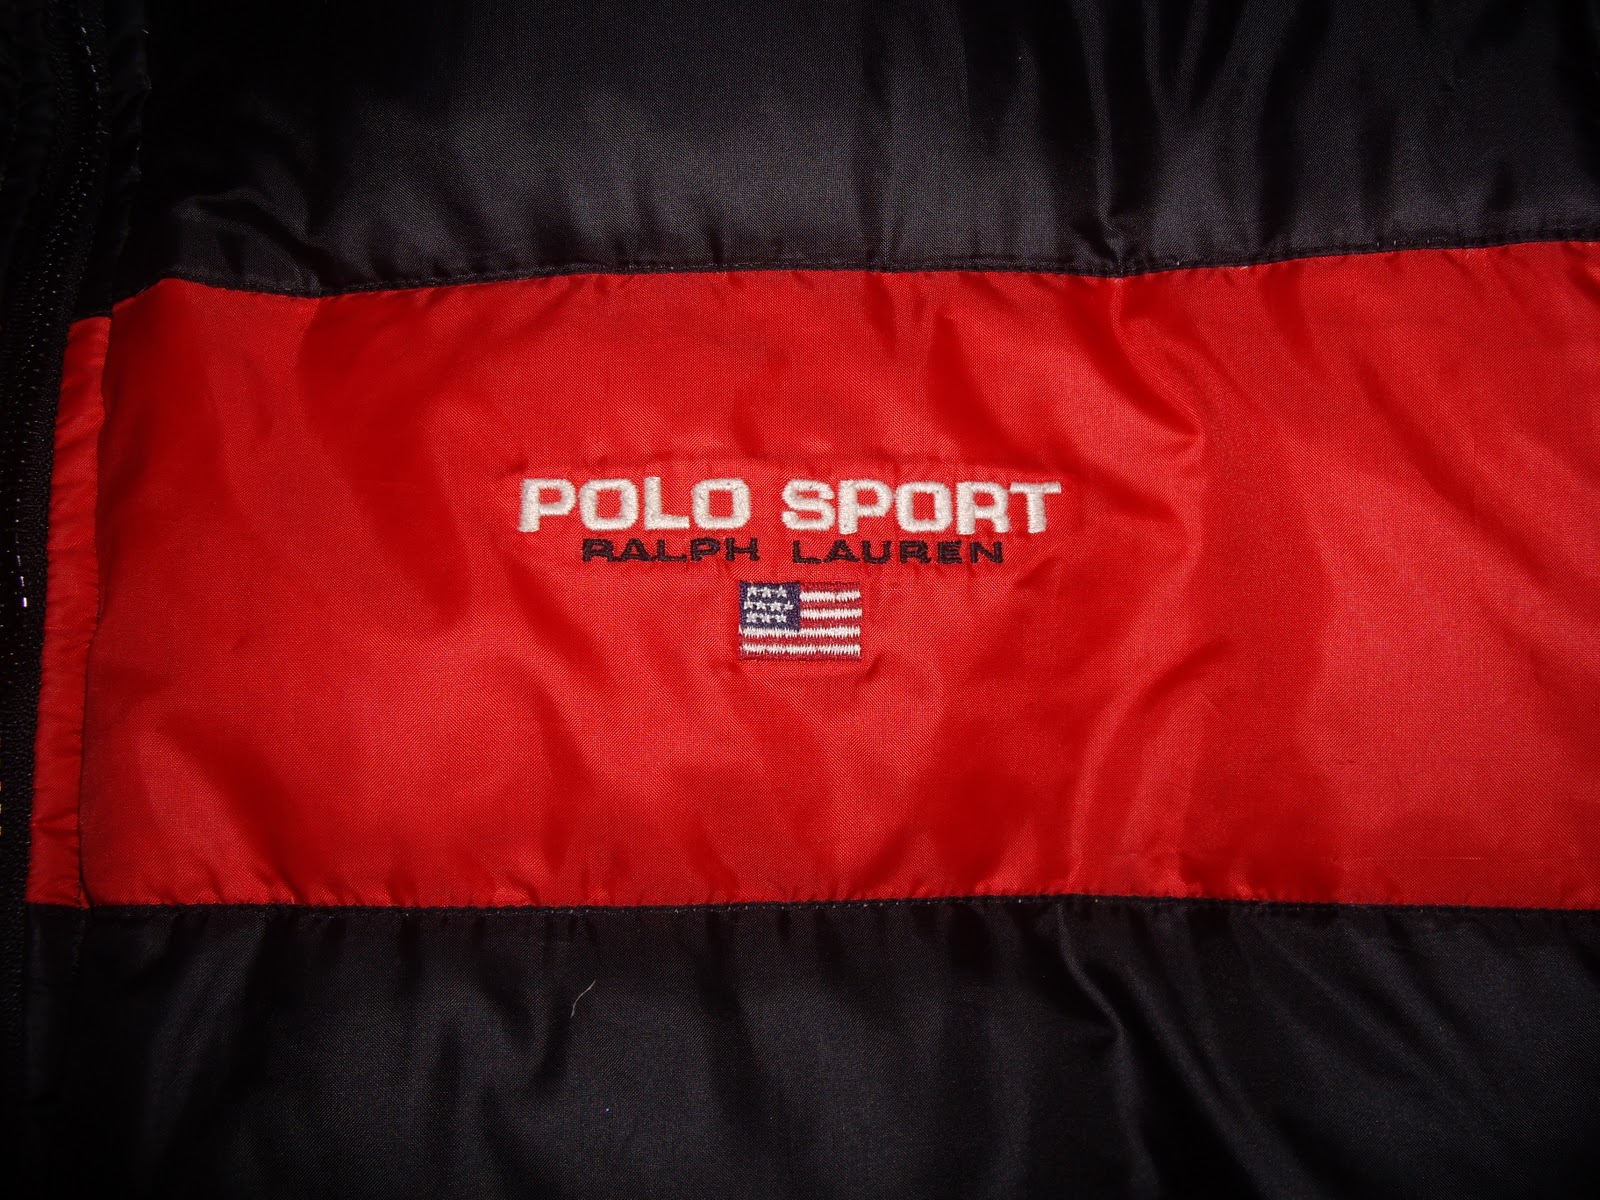 Lo Life Spain: FOR SALE POLO SPORT: